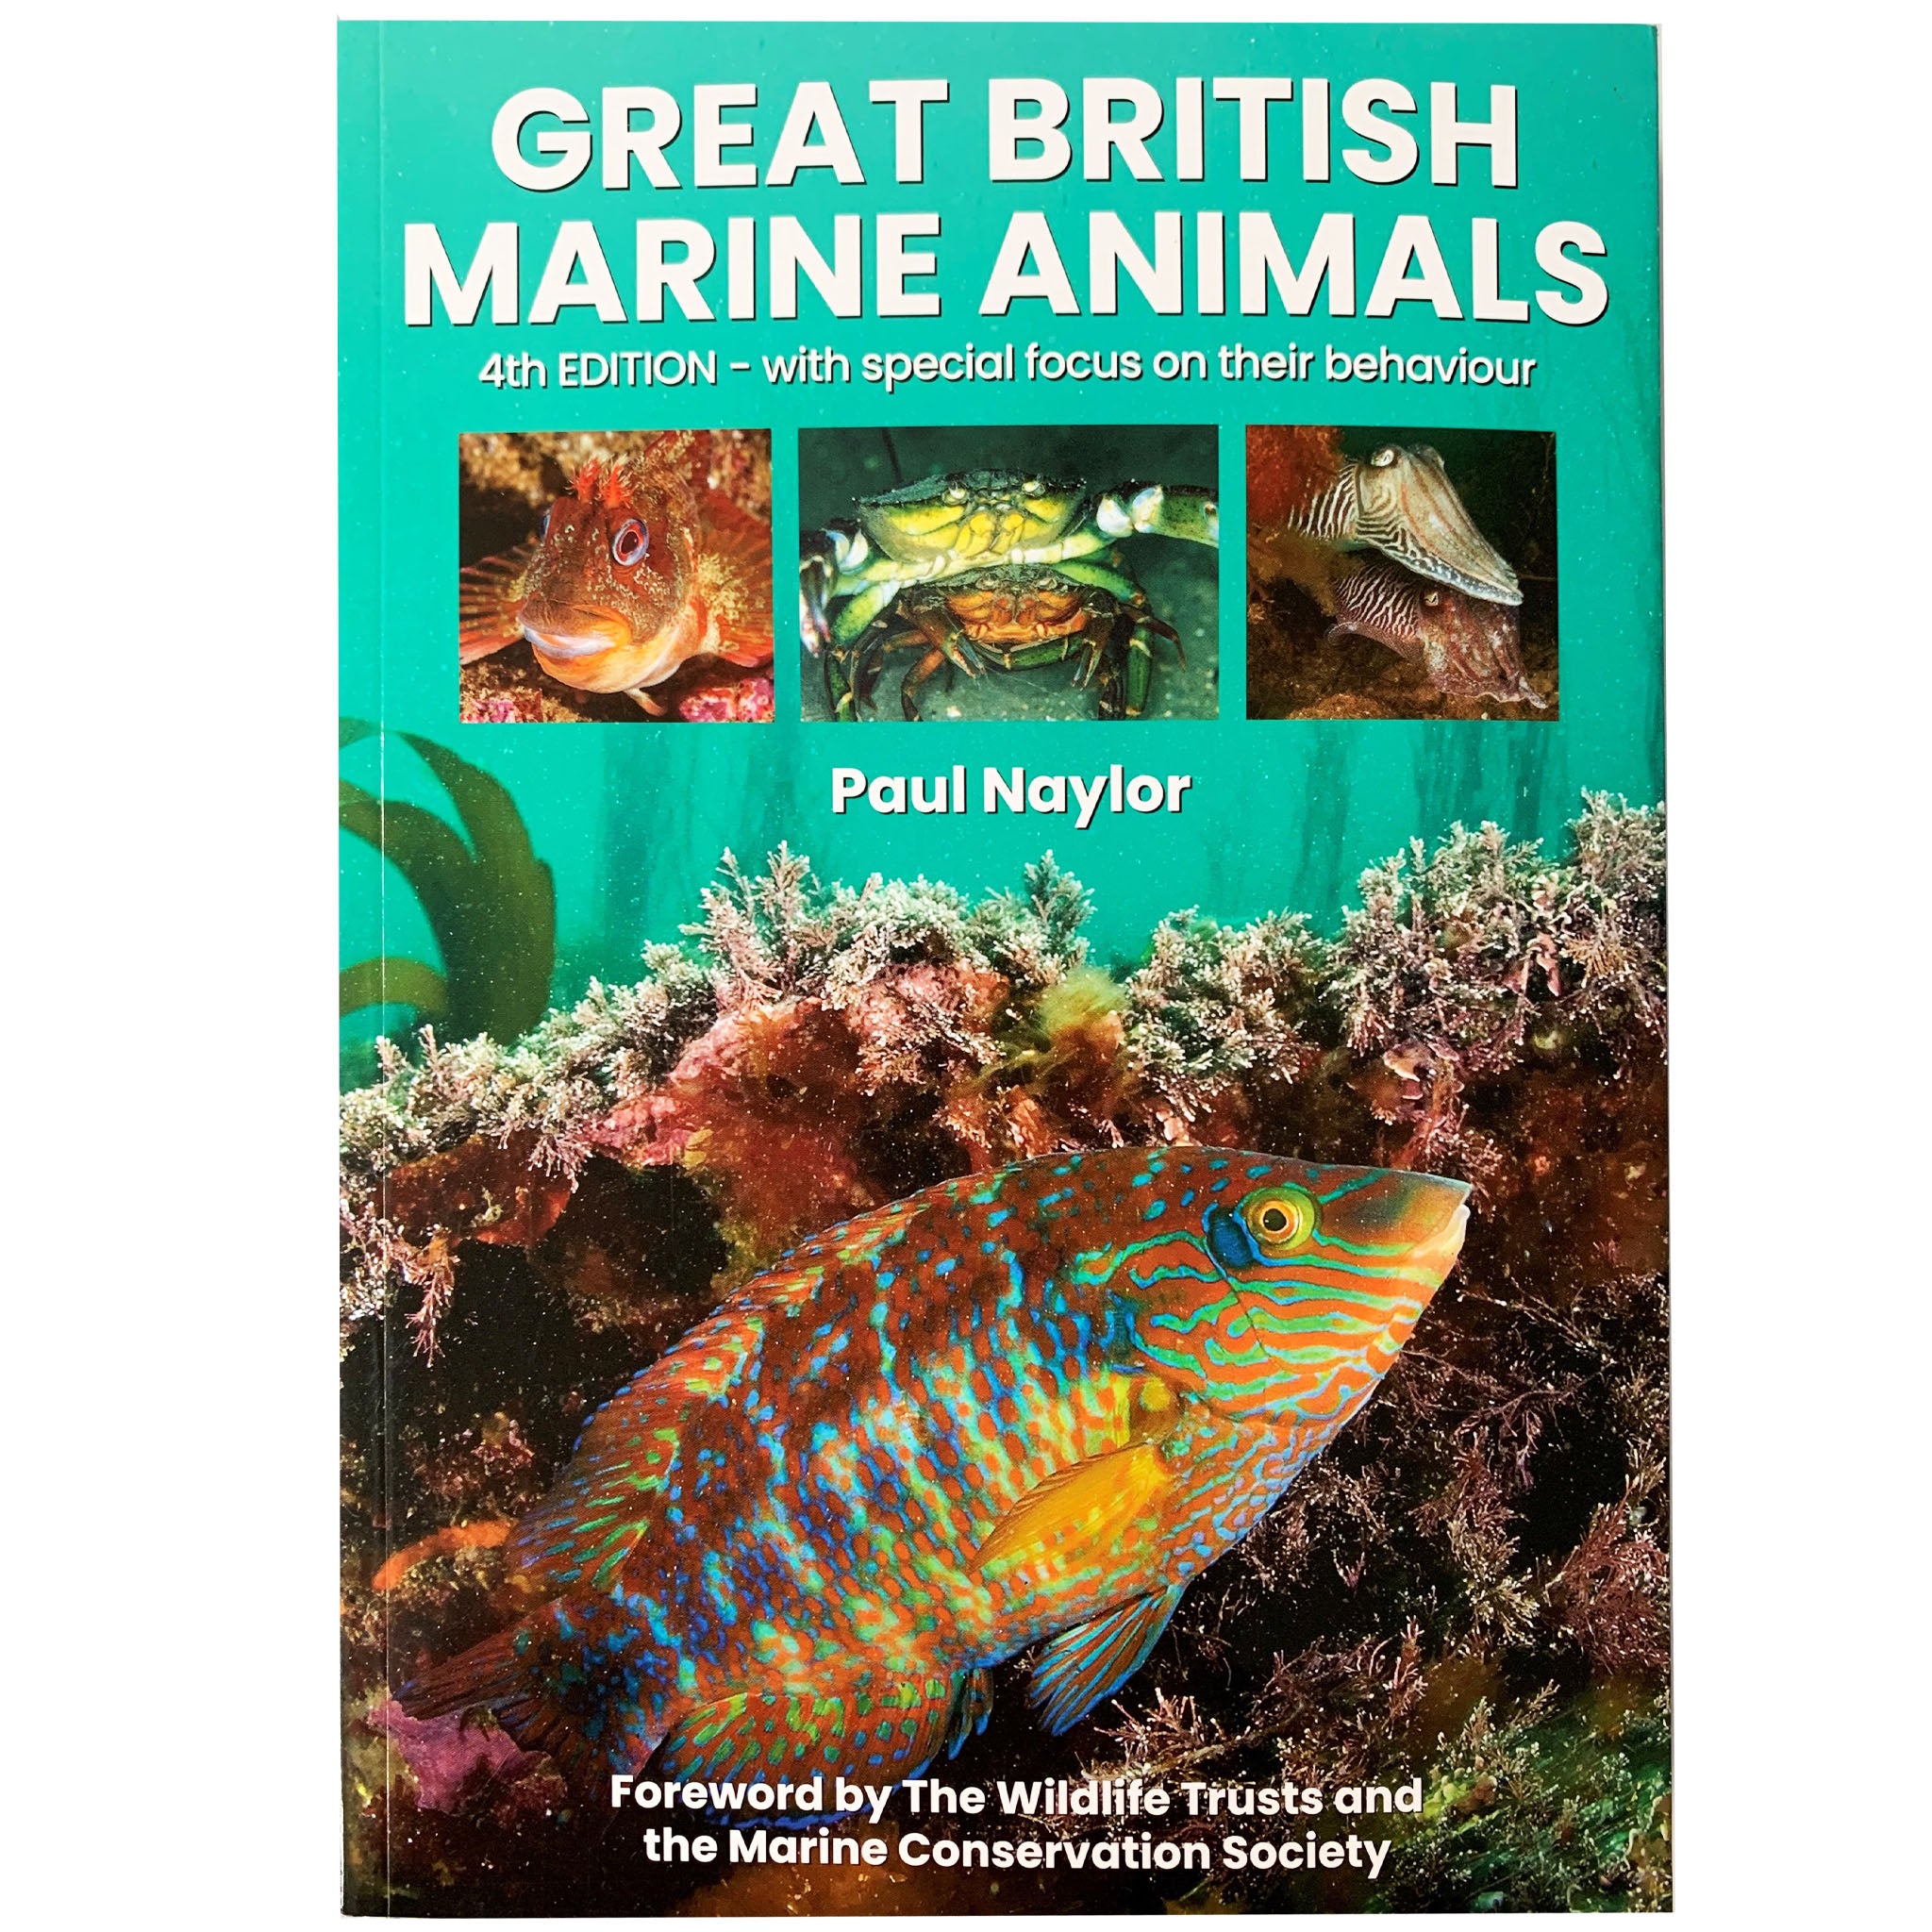 Great British Marine Animals by Paul Naylor 4th Edition